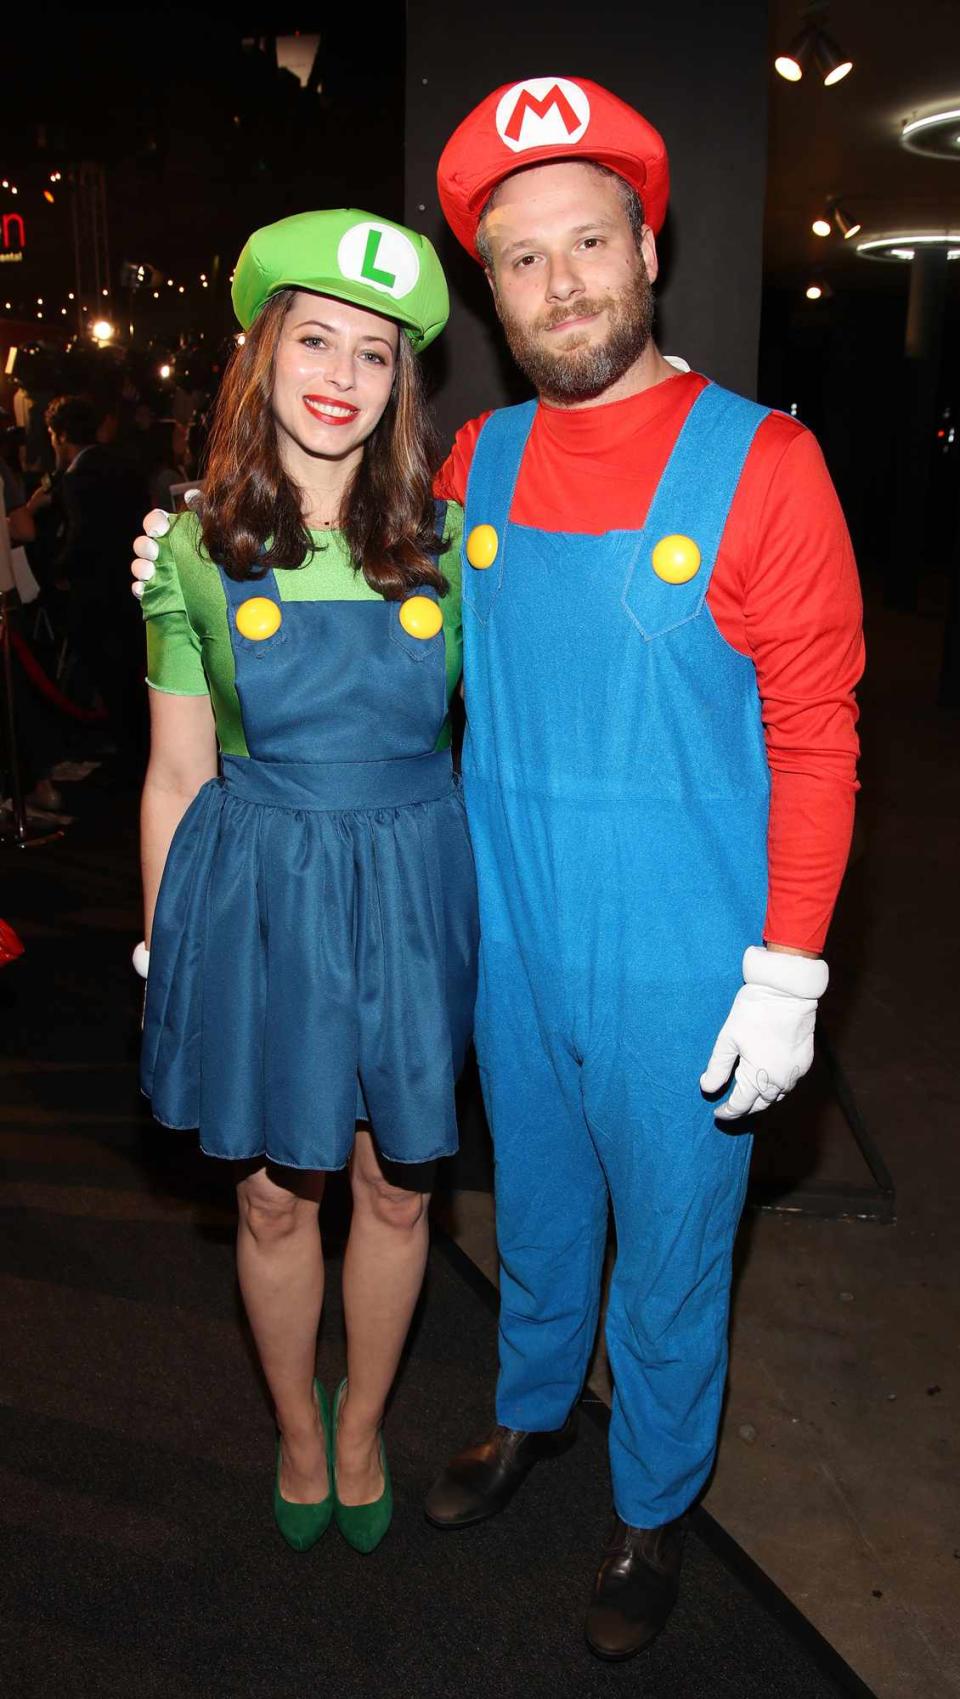 Lauren Miller (L) and and Seth Rogen attends Hilarity for Charity's 5th Annual Los Angeles Variety Show: Seth Rogen's Halloween at Hollywood Palladium on October 15, 2016 in Los Angeles, California